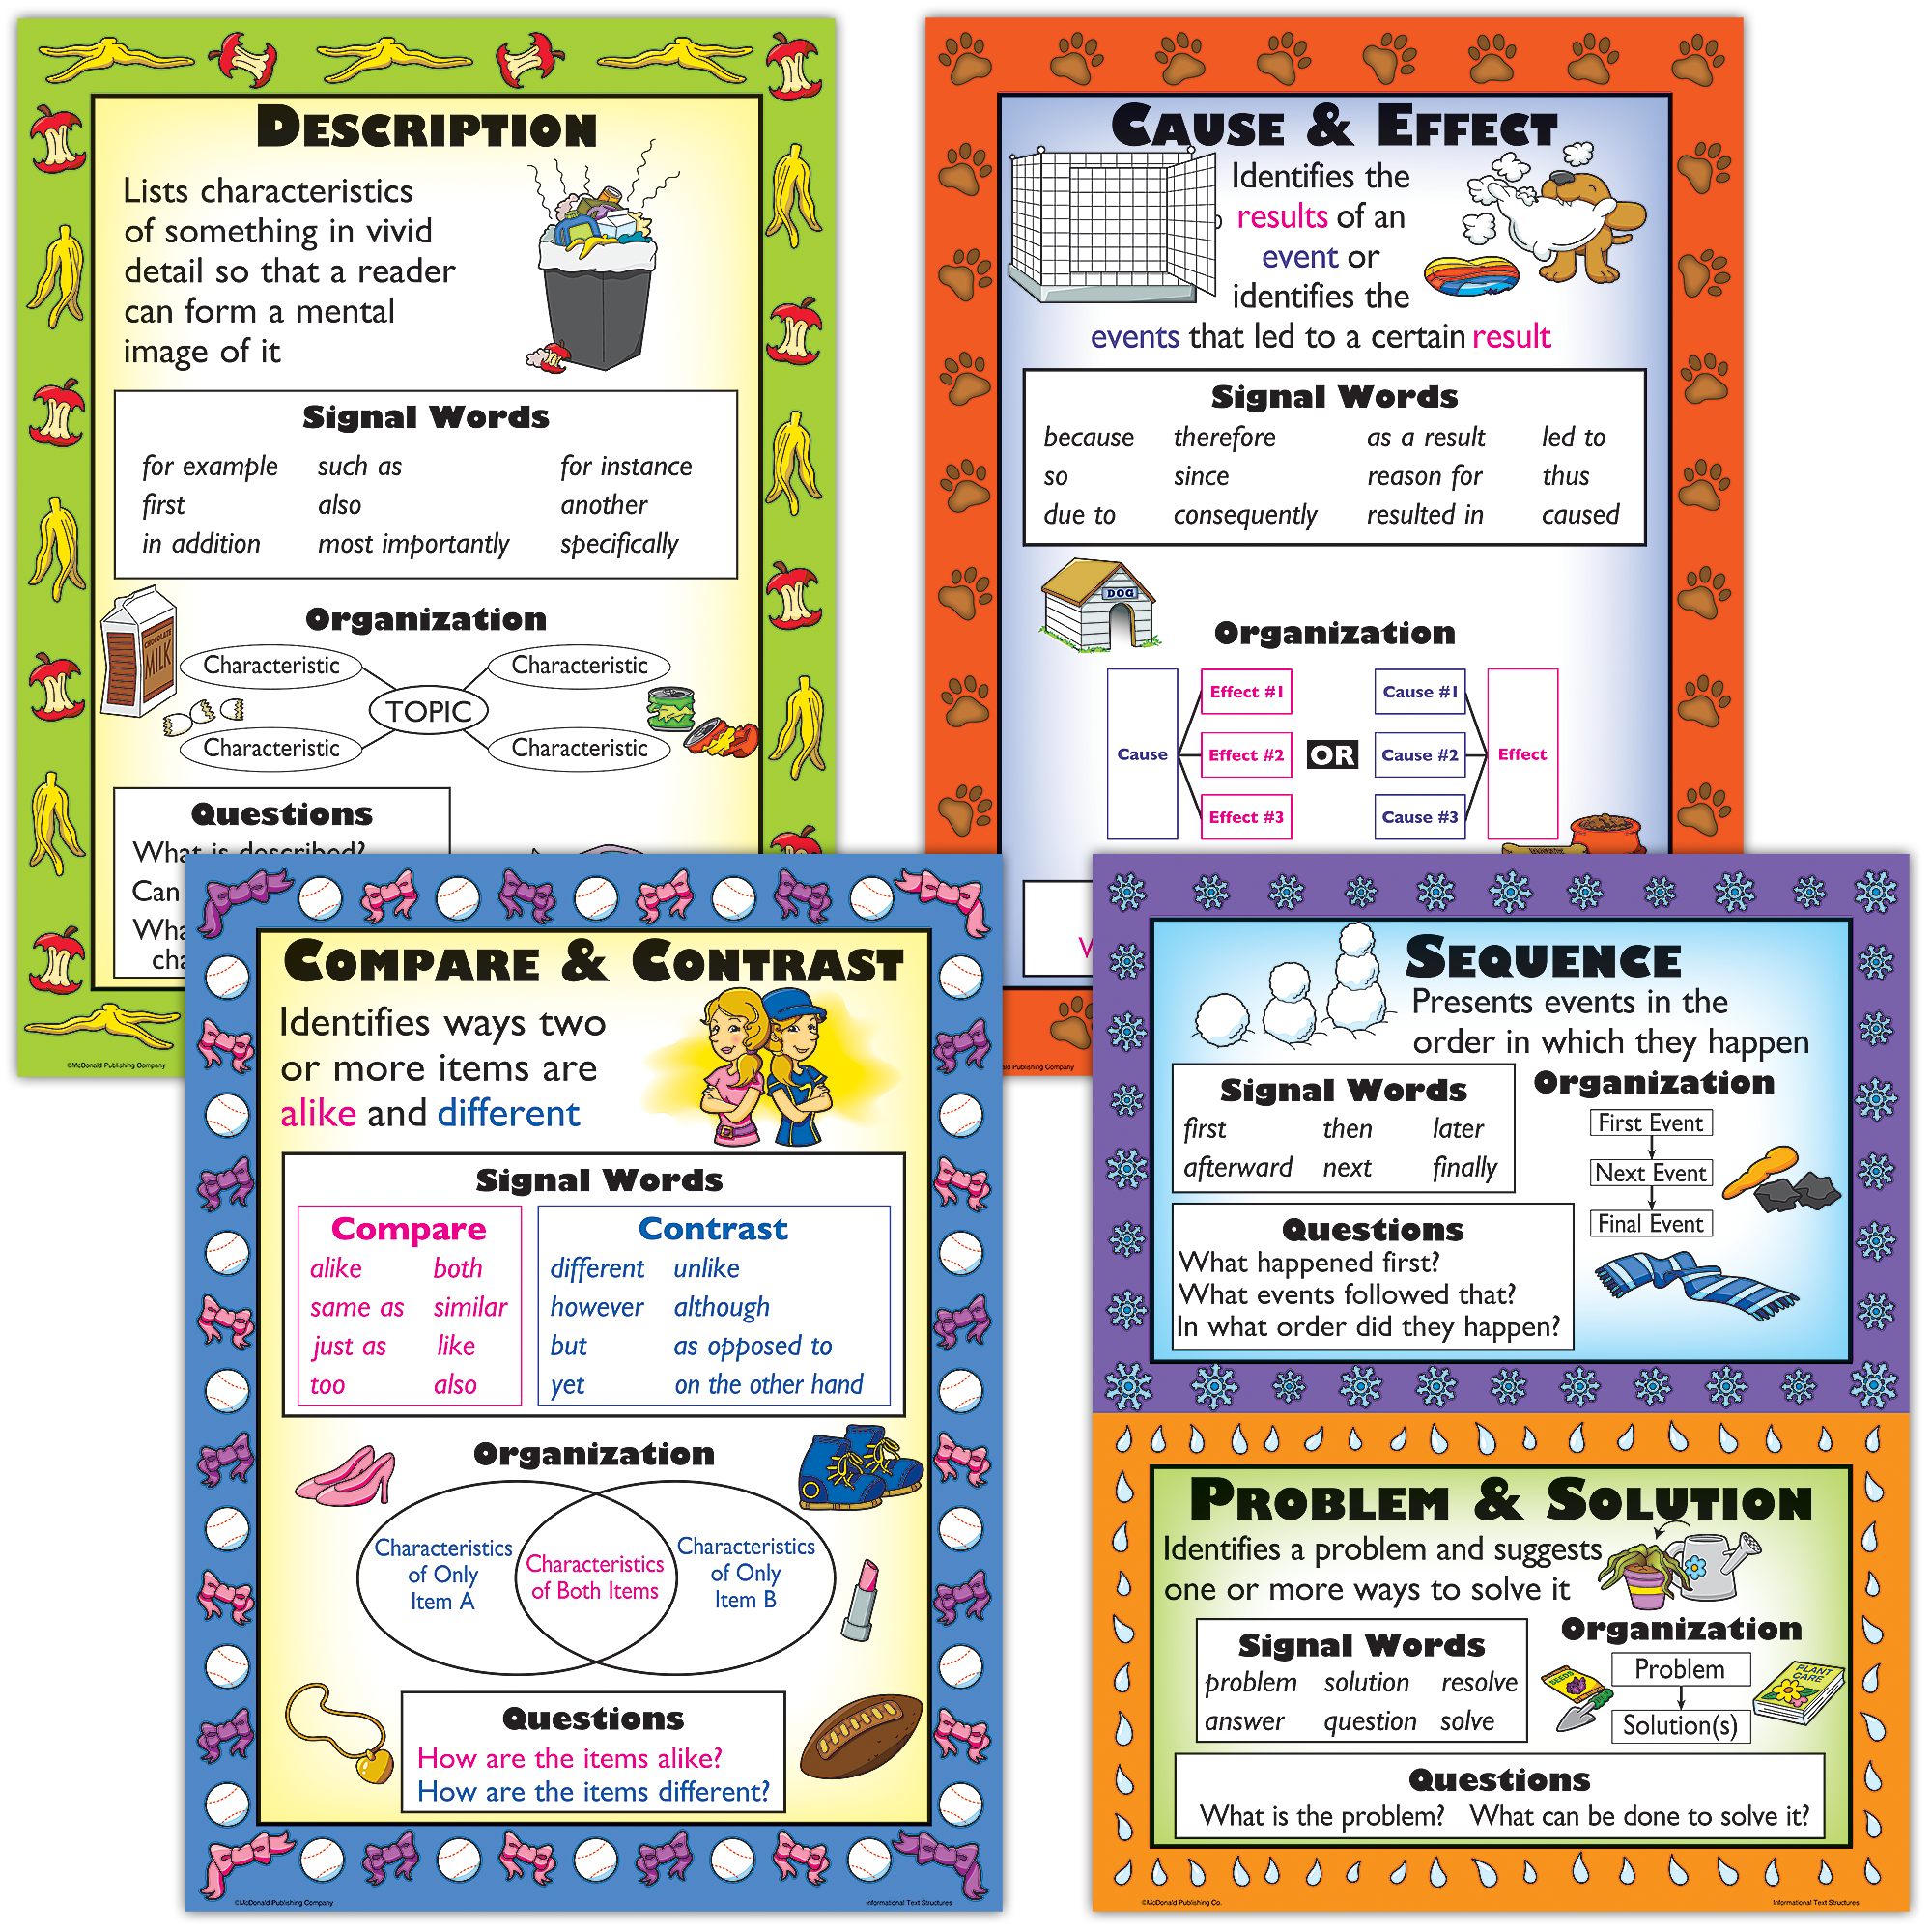 This set focuses on five common structures used in informational text: description, sequence, problem and solution, compare and contrast, and cause and effect. The posters explain each structure, show a common graphic organizer for it, and identify related signal words and questions. These posters are a valuable resource for students whether they are reading or writing text. Package includes 4 posters, 4 reproducible activity sheets, and a helpful teacher’s guide.